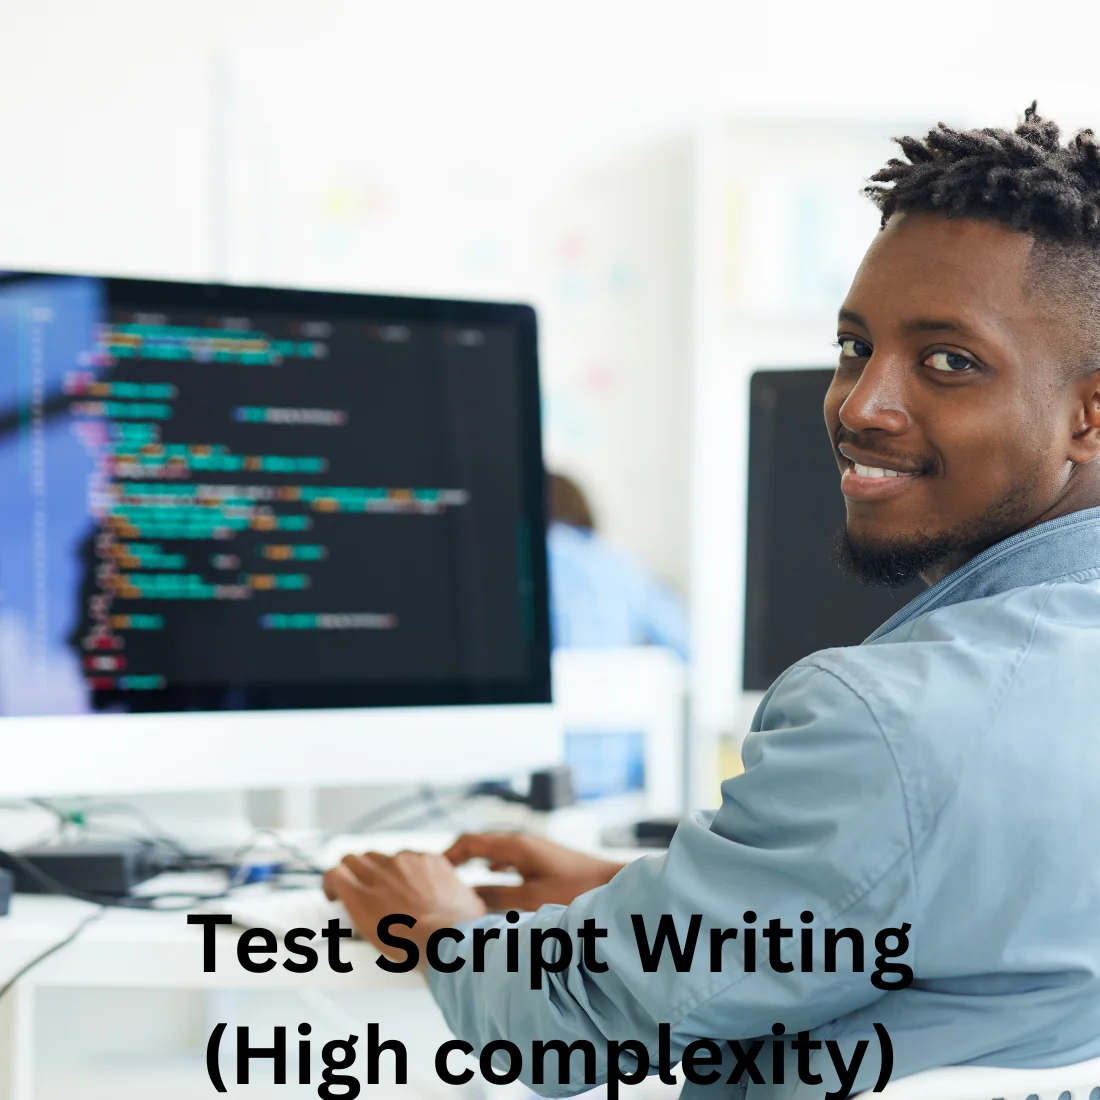 Test Script Writing (High complexity)